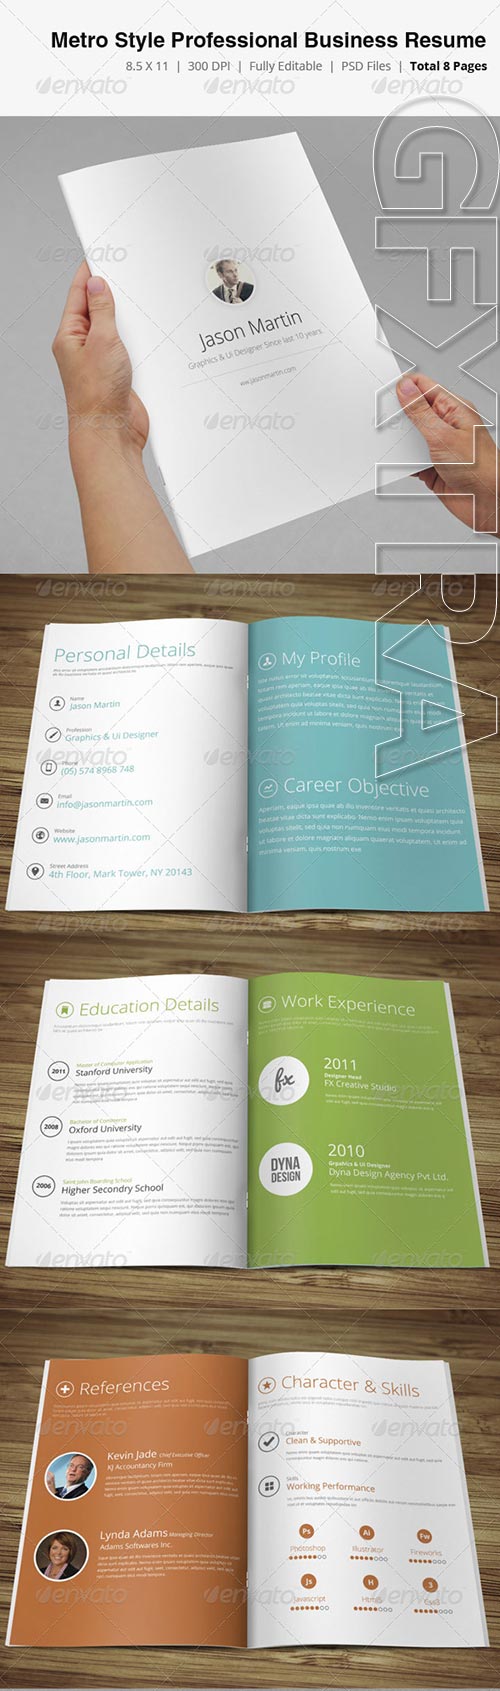 GraphicRiver - Metro Style Professional Business Resume